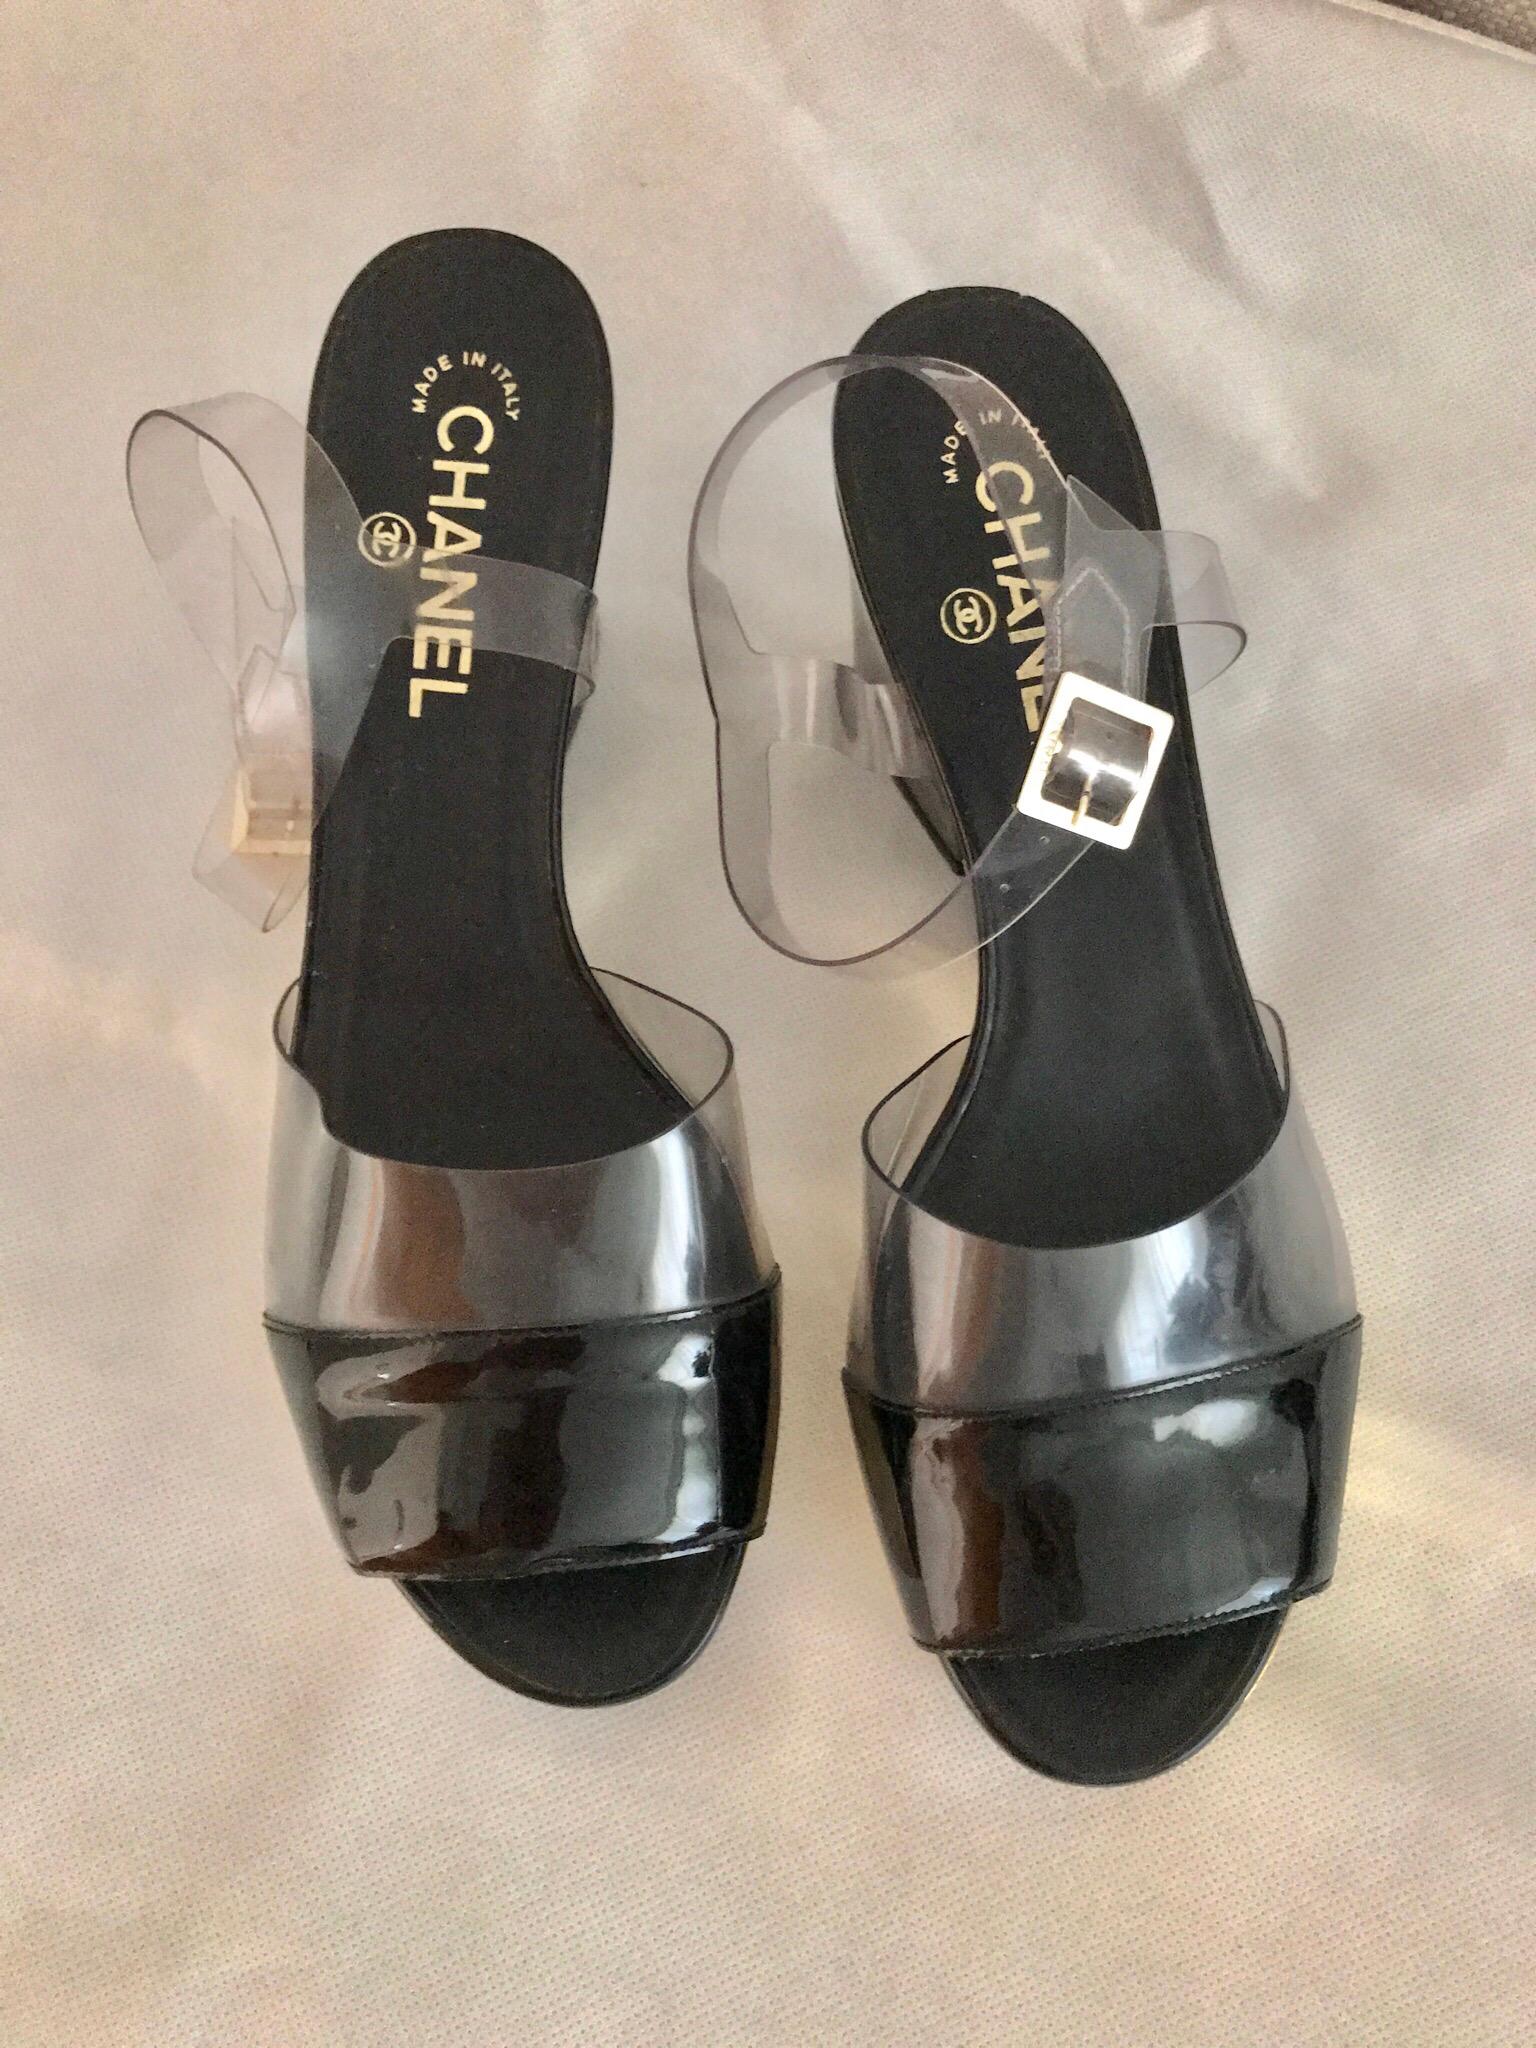 2000s CHANEL clear and black platform sandals 
Size: 39